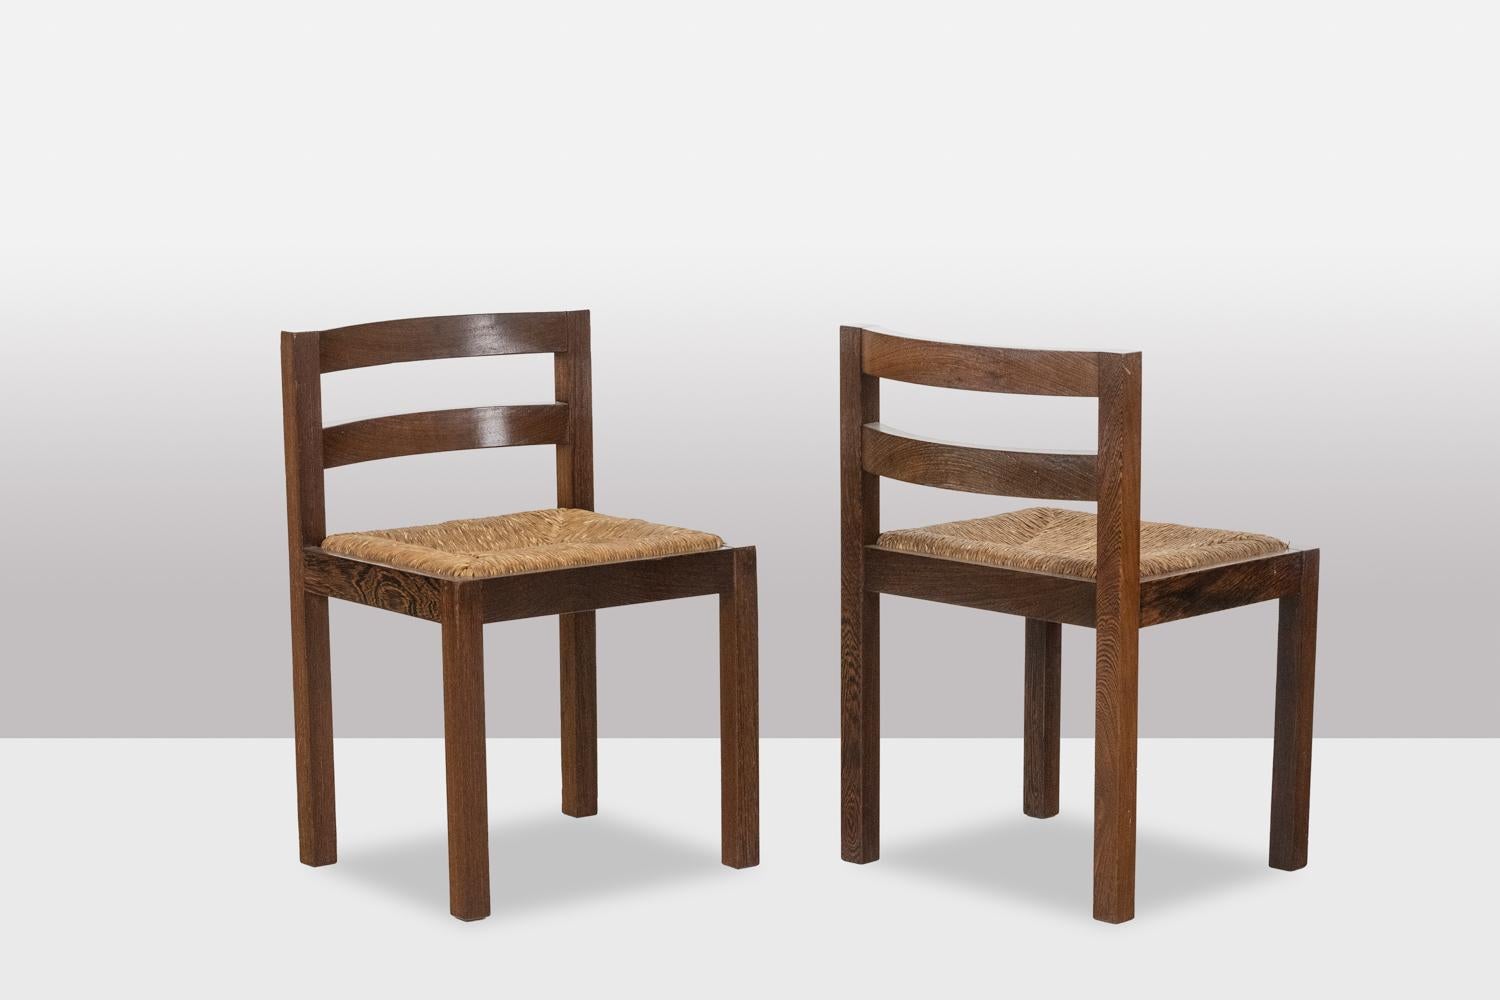 Dining room set in wenge, consisting of a table and six chairs. Rectangular table, cross-shaped base. Chairs with rope seats and curved backs.

Danish work realized in the 1970s.